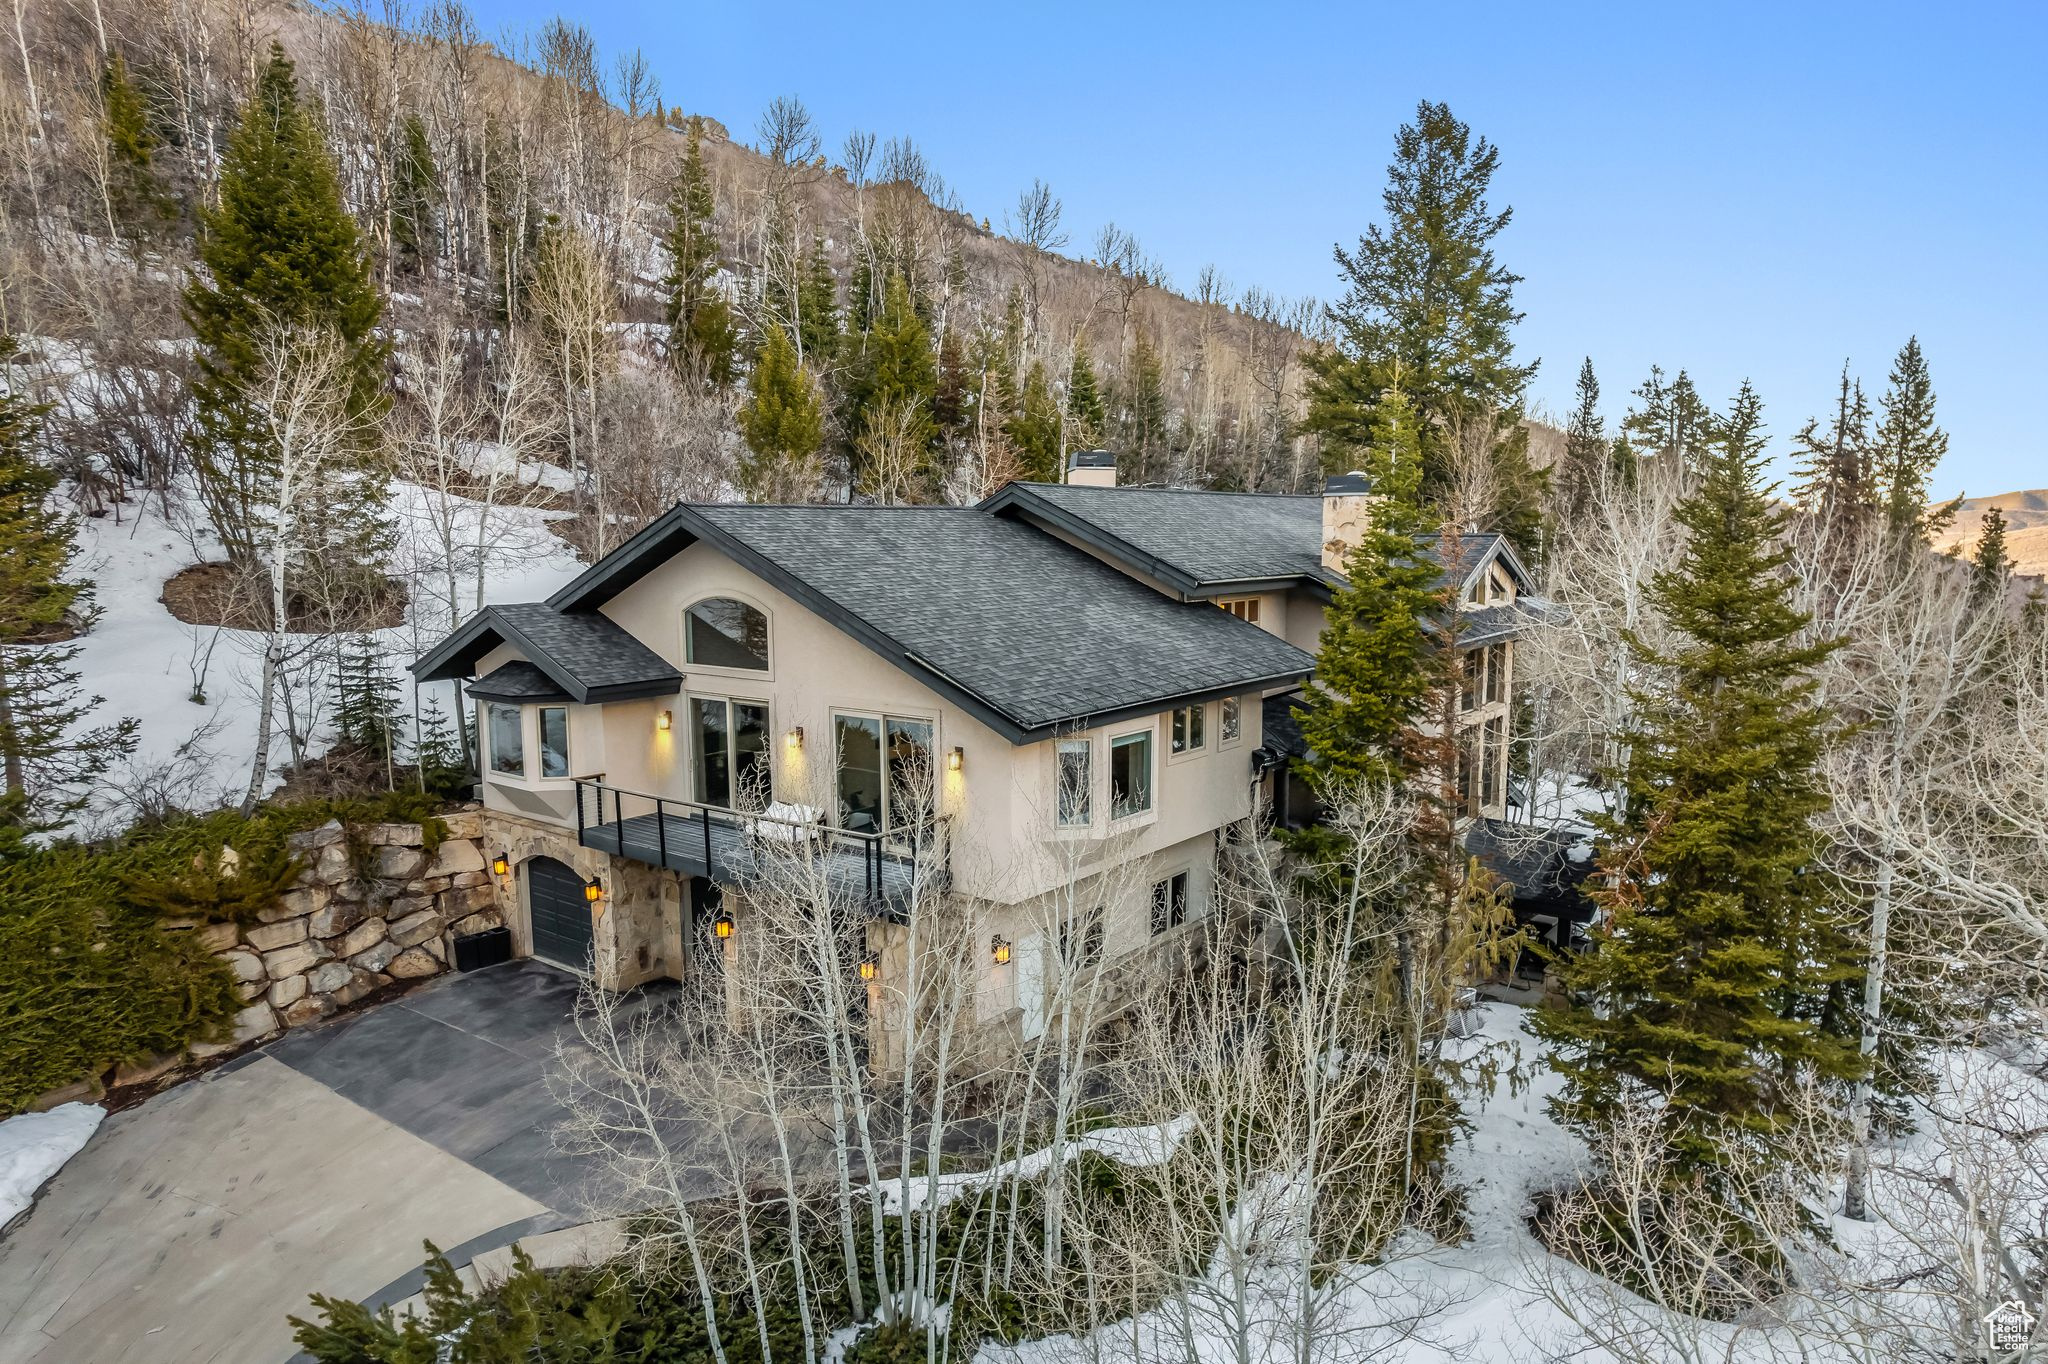 6880 CANYON DRIVE, Park City, Utah 84098, 5 Bedrooms Bedrooms, 22 Rooms Rooms,2 BathroomsBathrooms,Residential,For sale,CANYON DRIVE,1992282